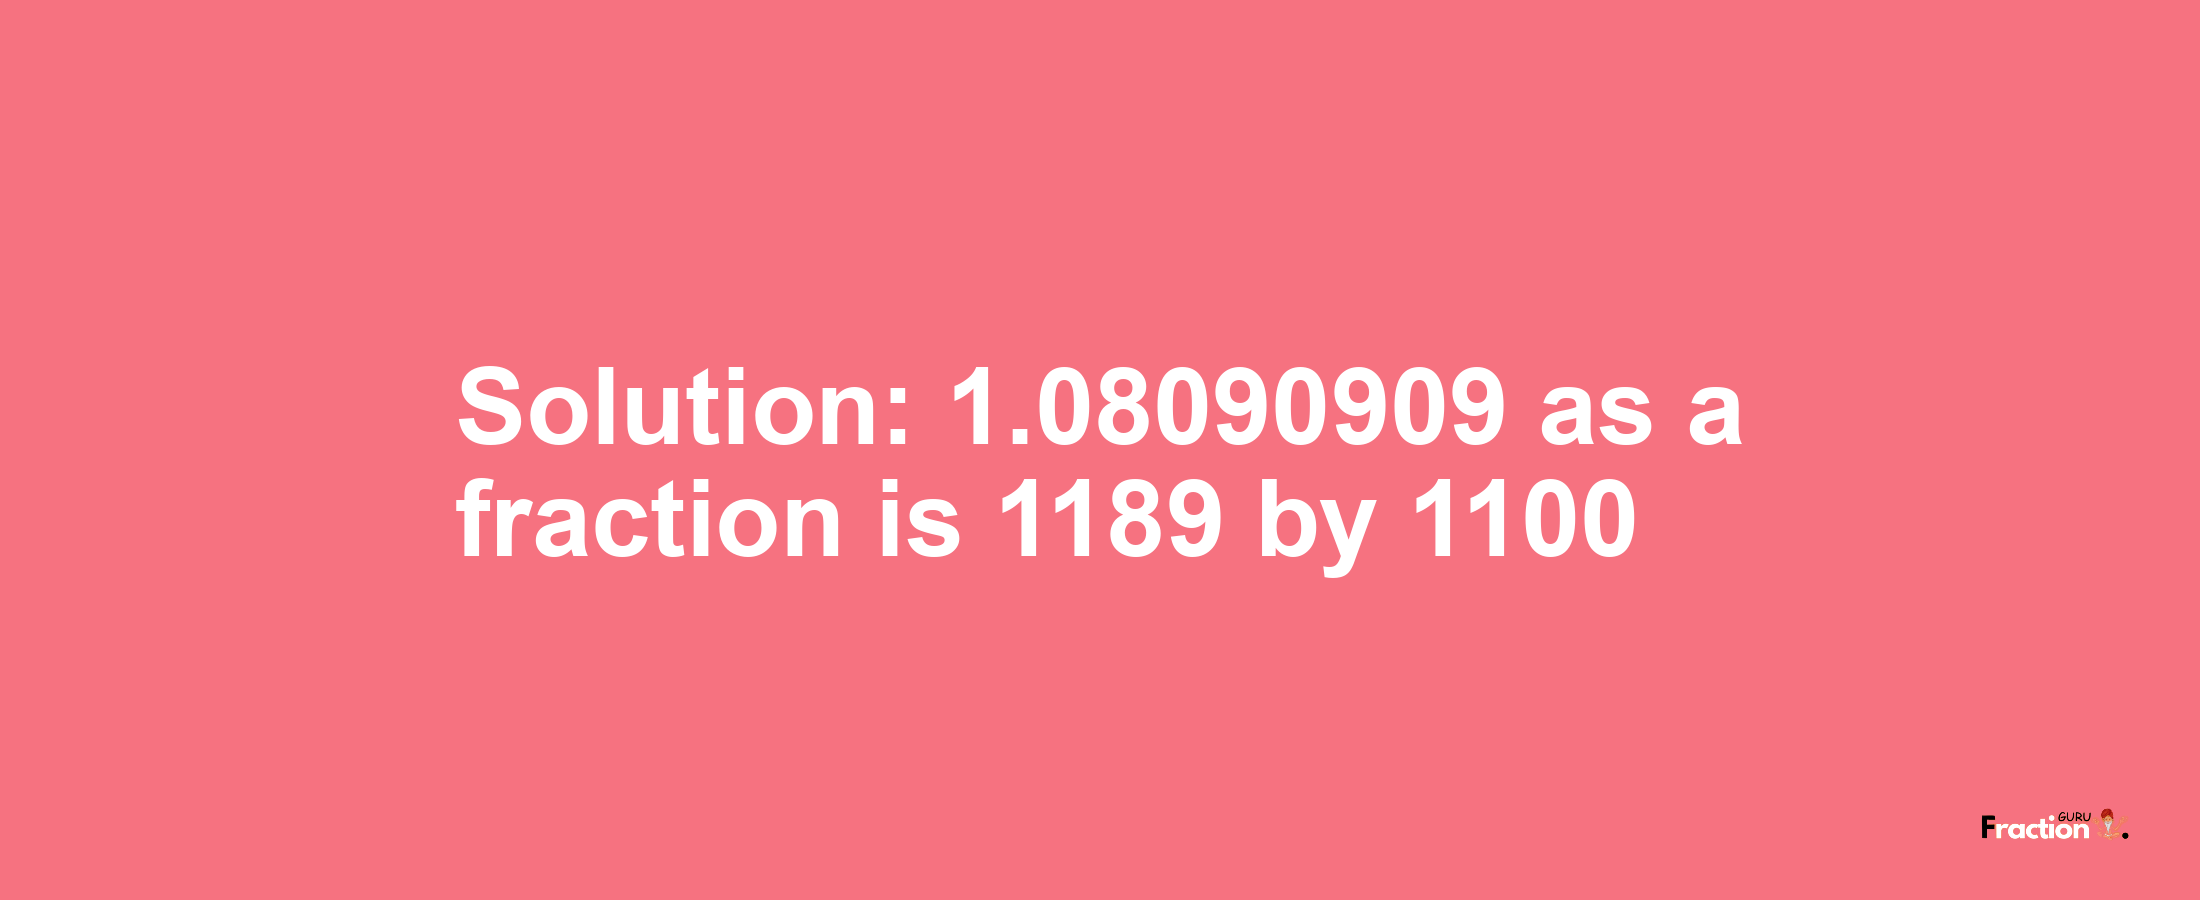 Solution:1.08090909 as a fraction is 1189/1100